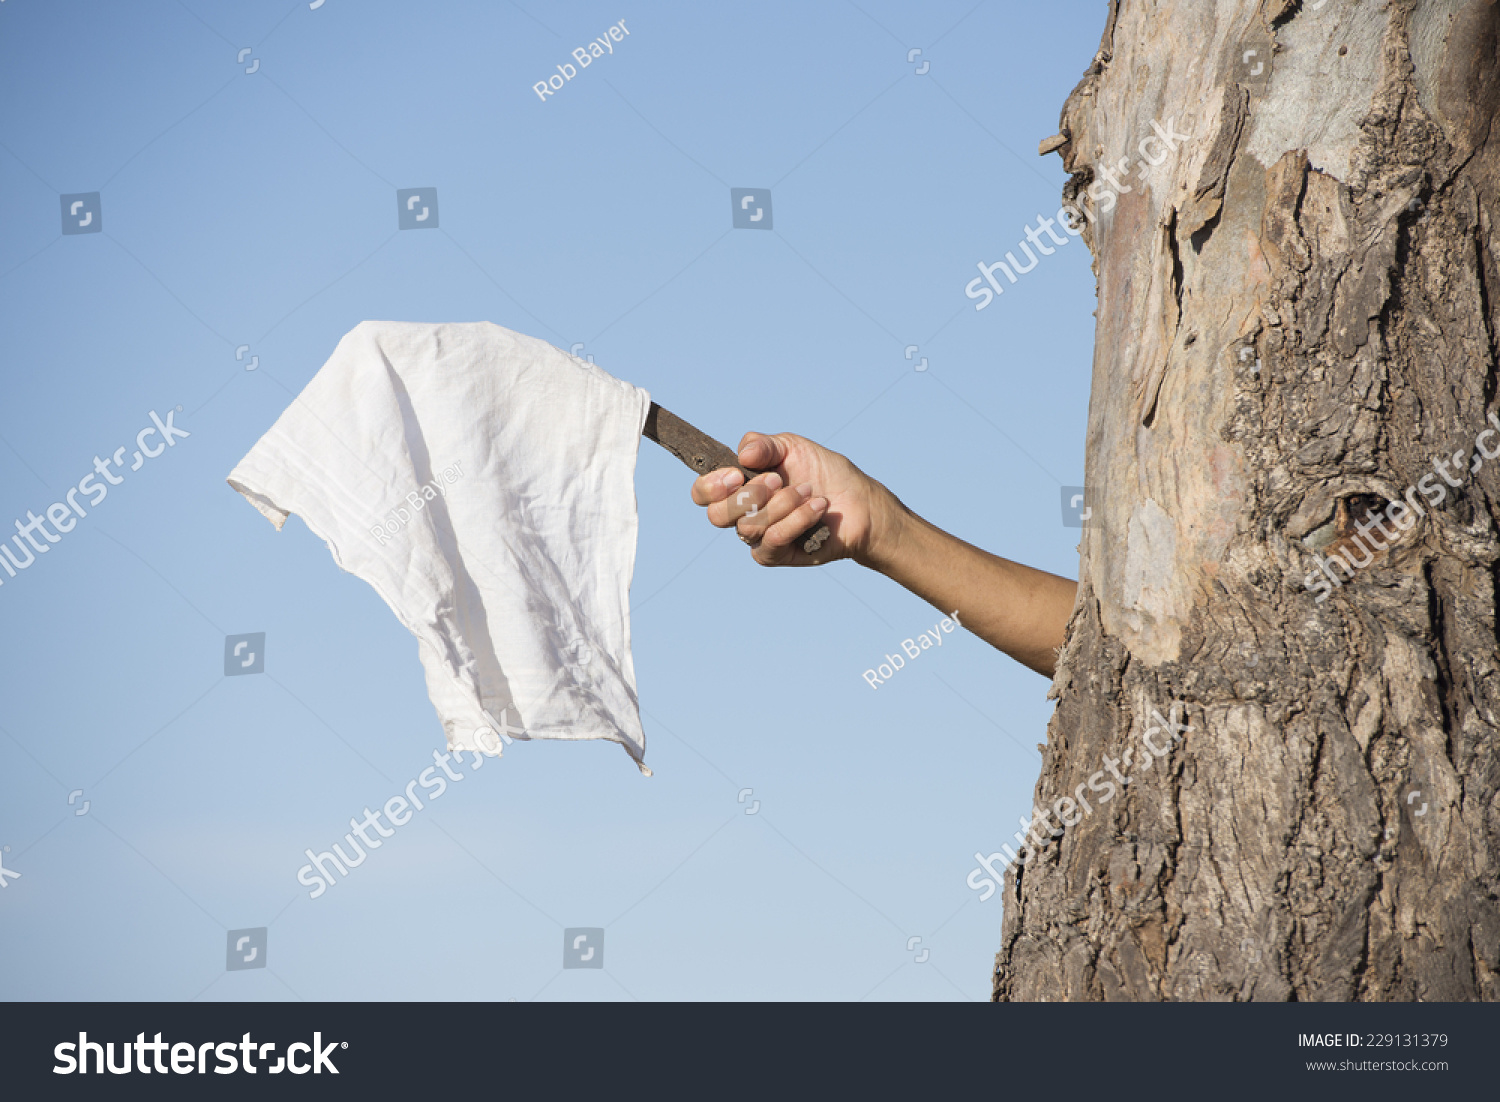 Arm and hand of person hiding behind tree holding white flag, cloth or handkerchief as sign for peace, resignation and negotiations, with blue sky as outdoor background and copy space. #229131379